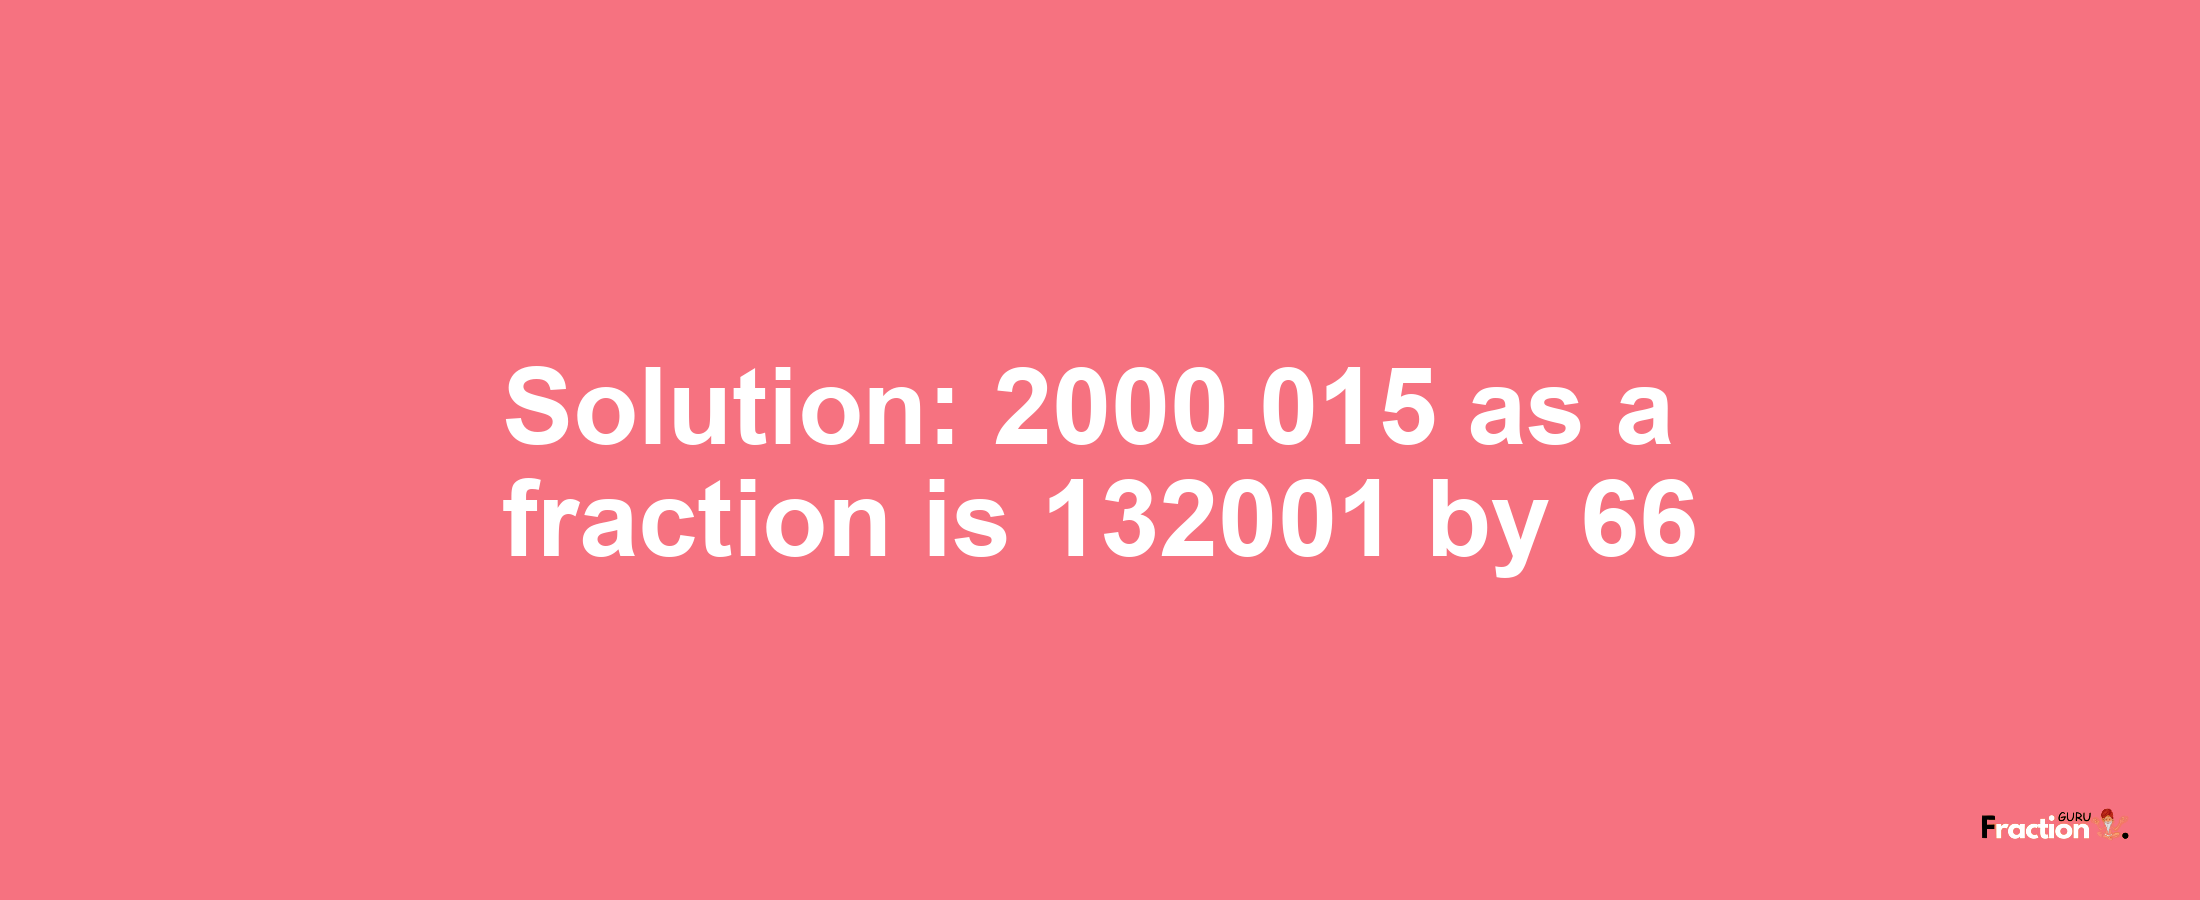 Solution:2000.015 as a fraction is 132001/66